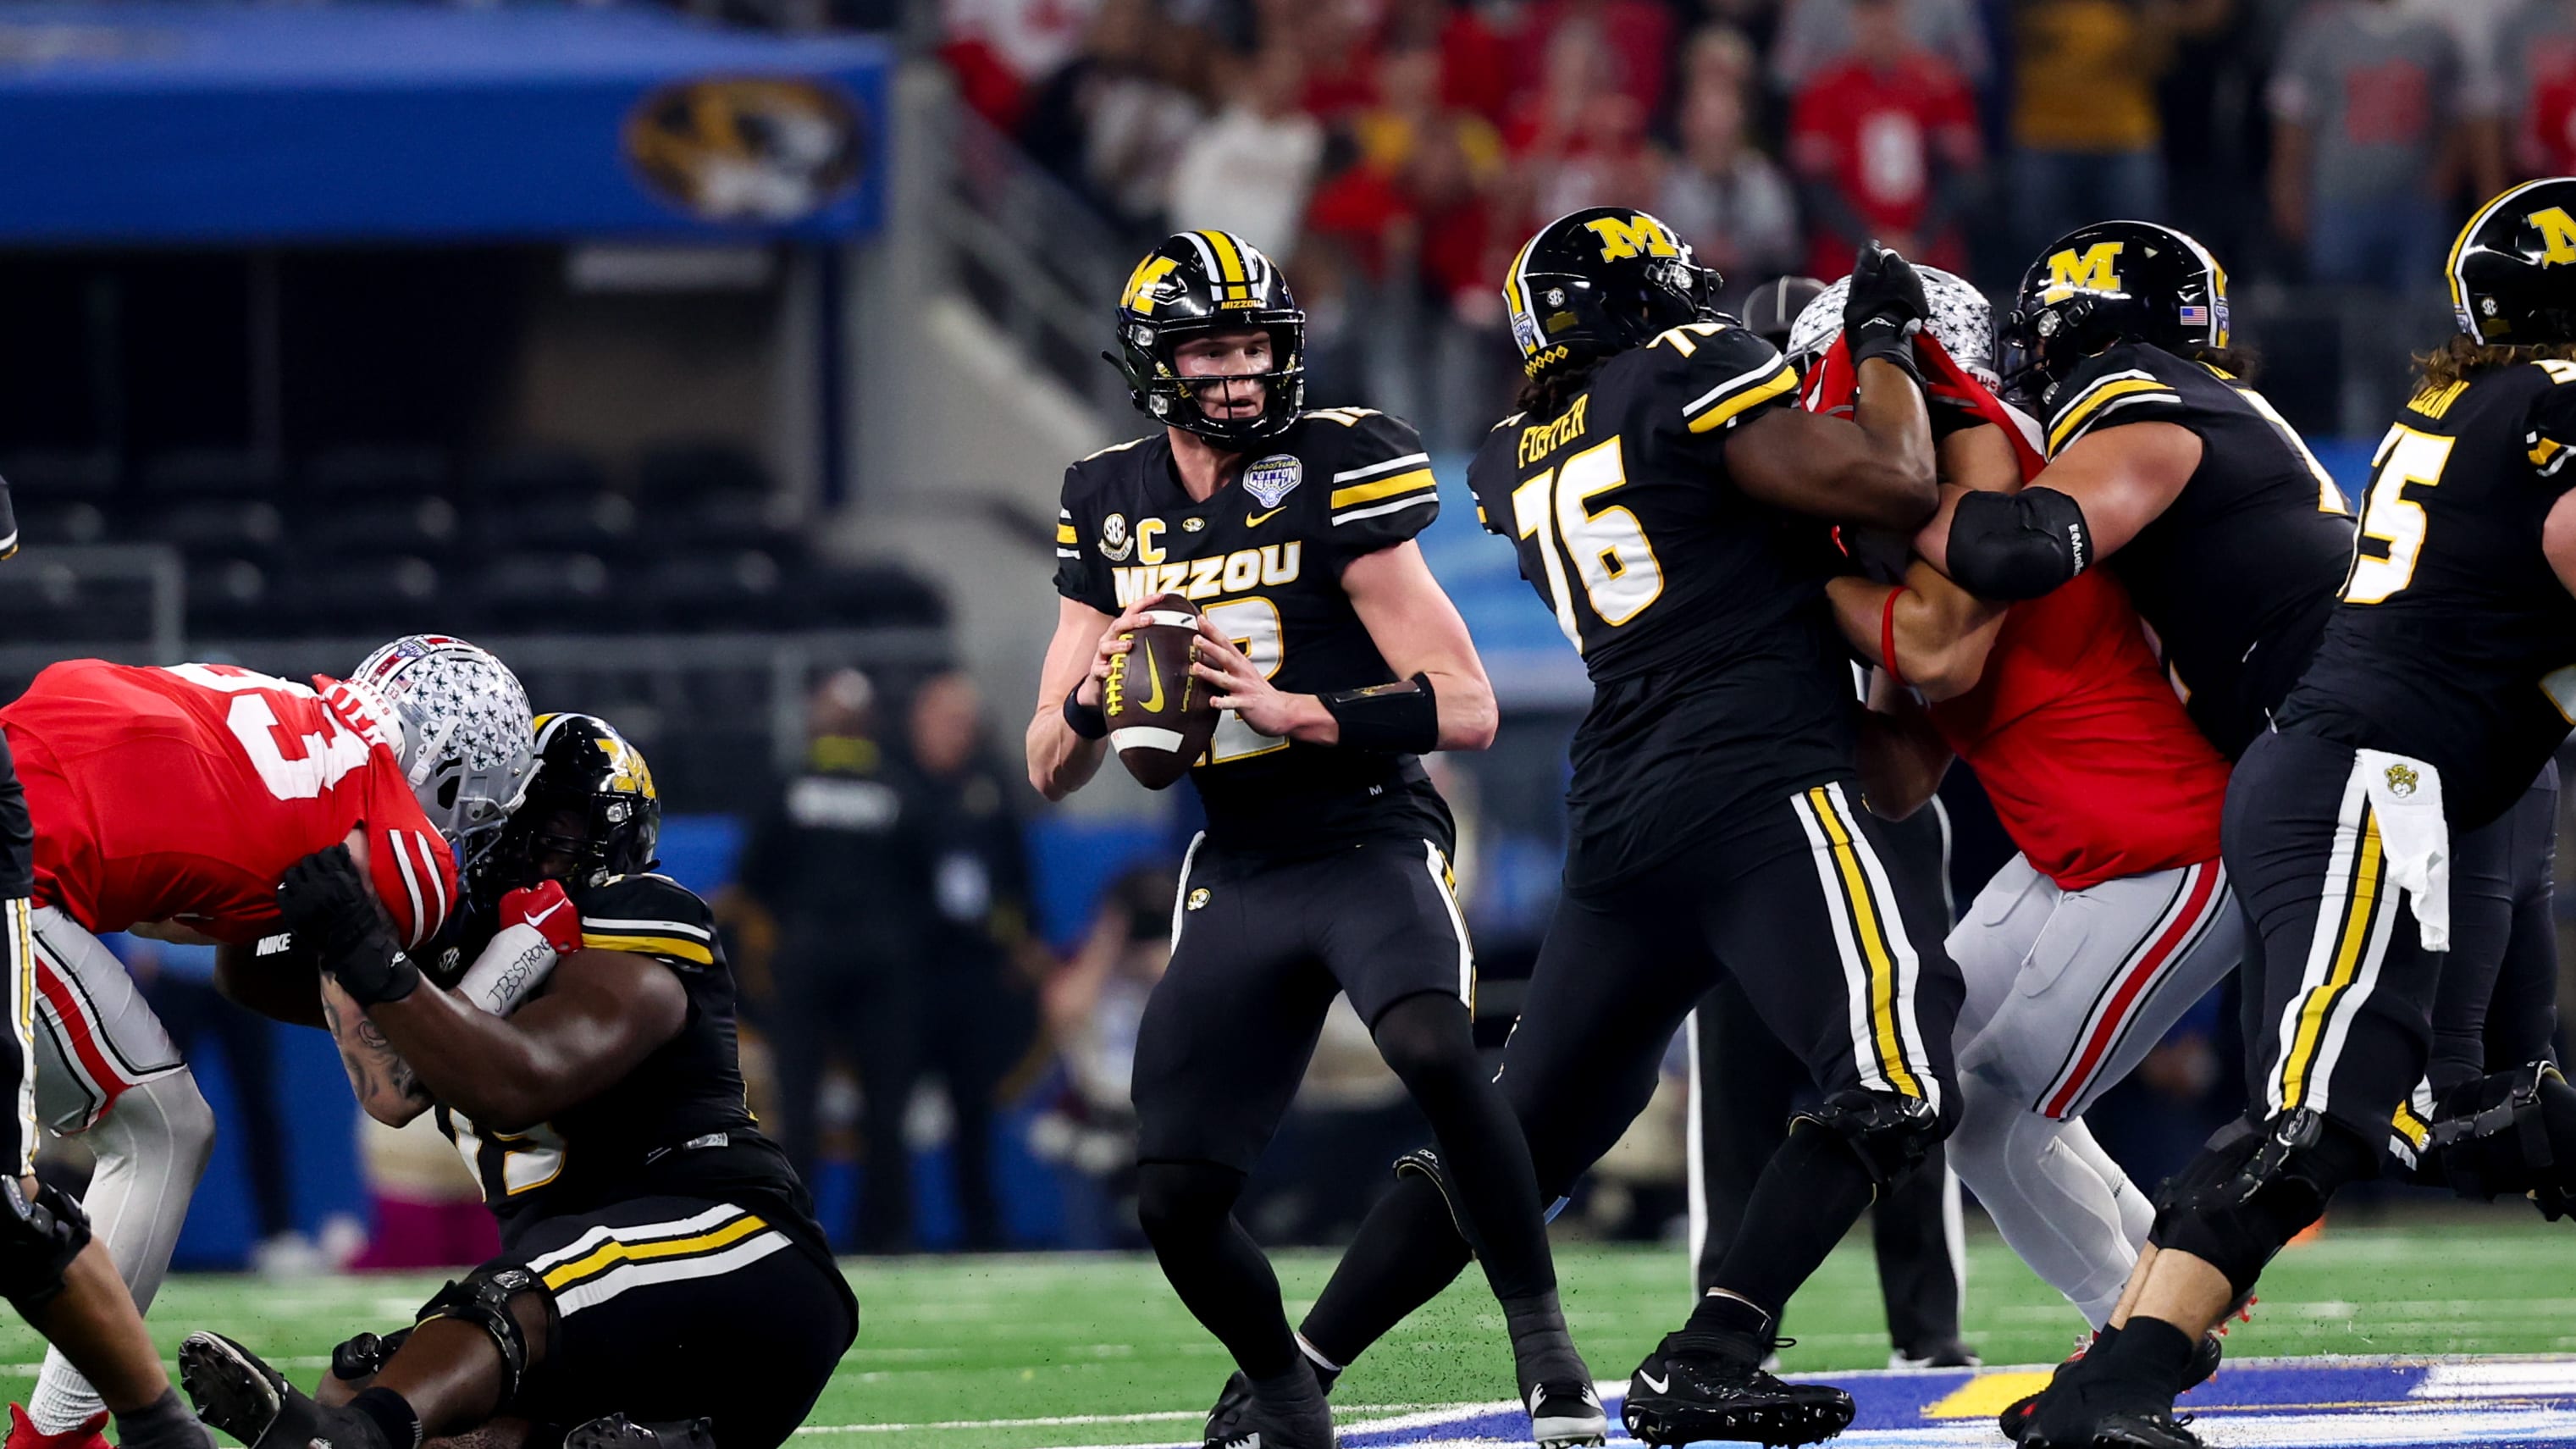 Javon Foster, right, protects quarterback Brady Cook, center, on a play during the Cotton Bowl on Dec. 29, 2023.